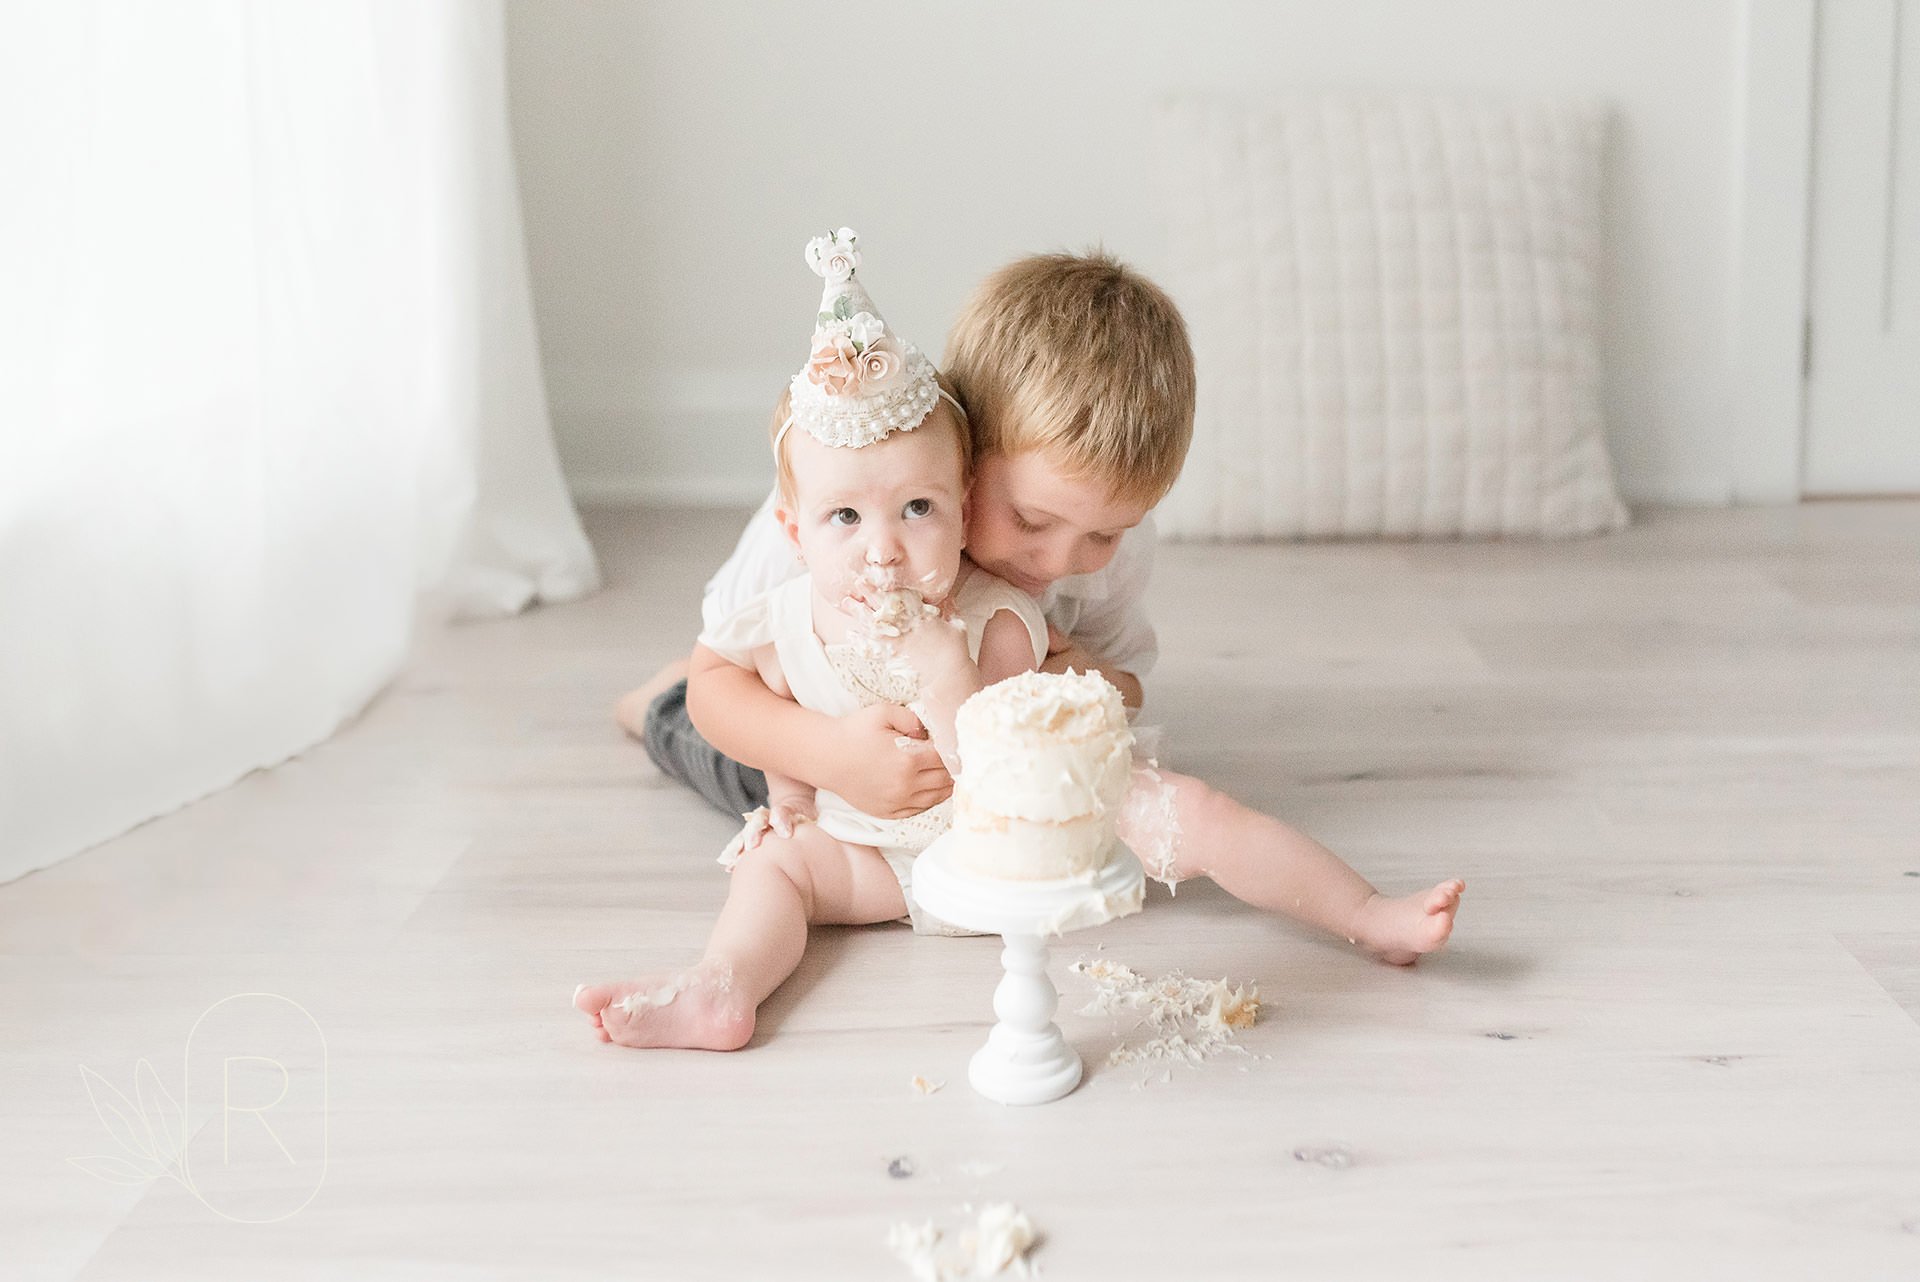 pausing-the-little-moments-siblings-playing-first-birthday-family-photographer-niagara-ontario.jpg